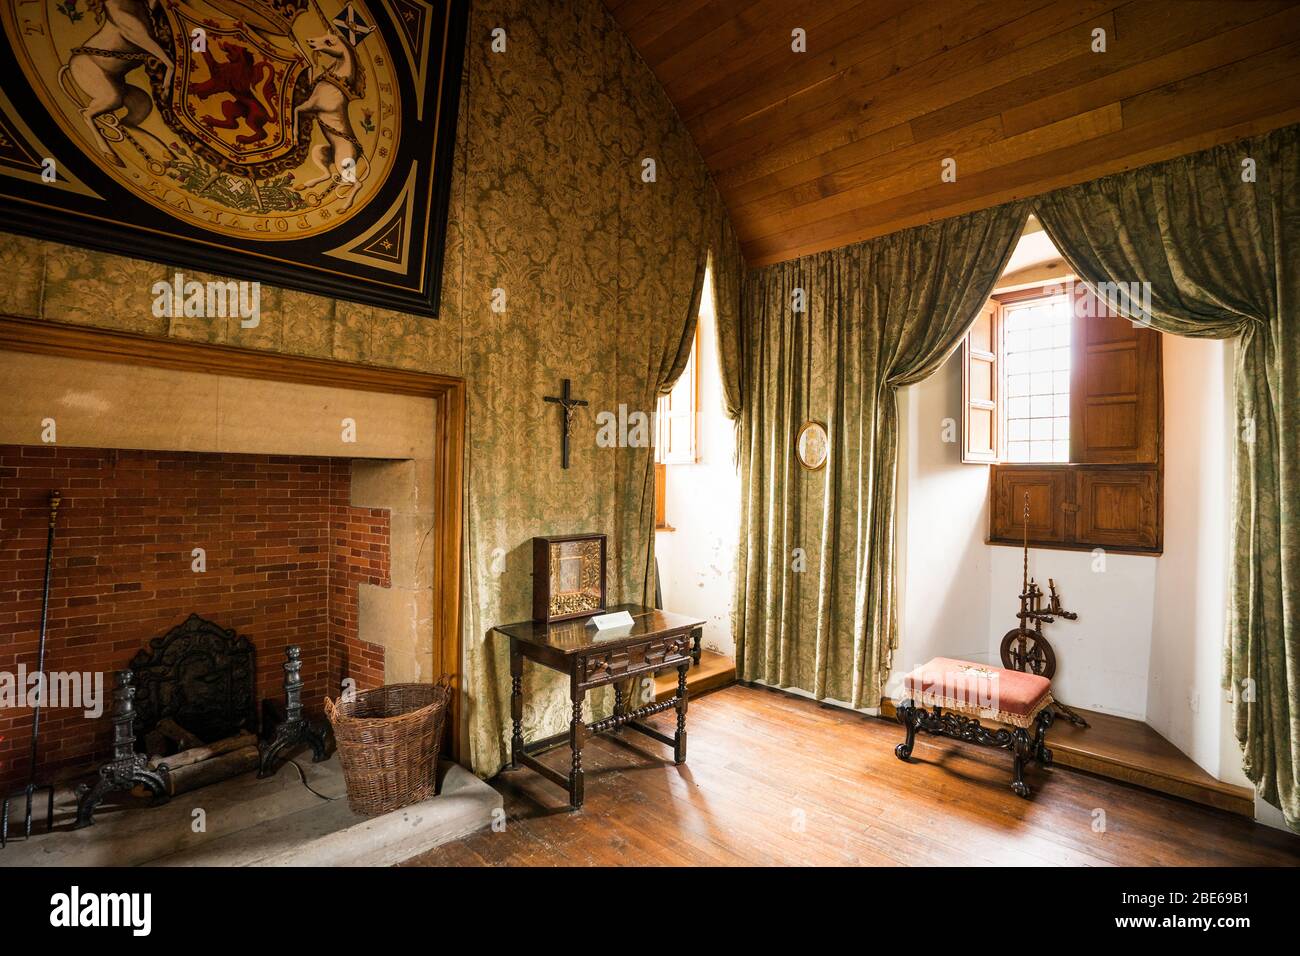 Bedroom of Mary Queen of Scots has fabric wall hangings and a four-poster bed upstairs inside Falkland Castle, home of Mary Queen of Scots, Falkland, Stock Photo